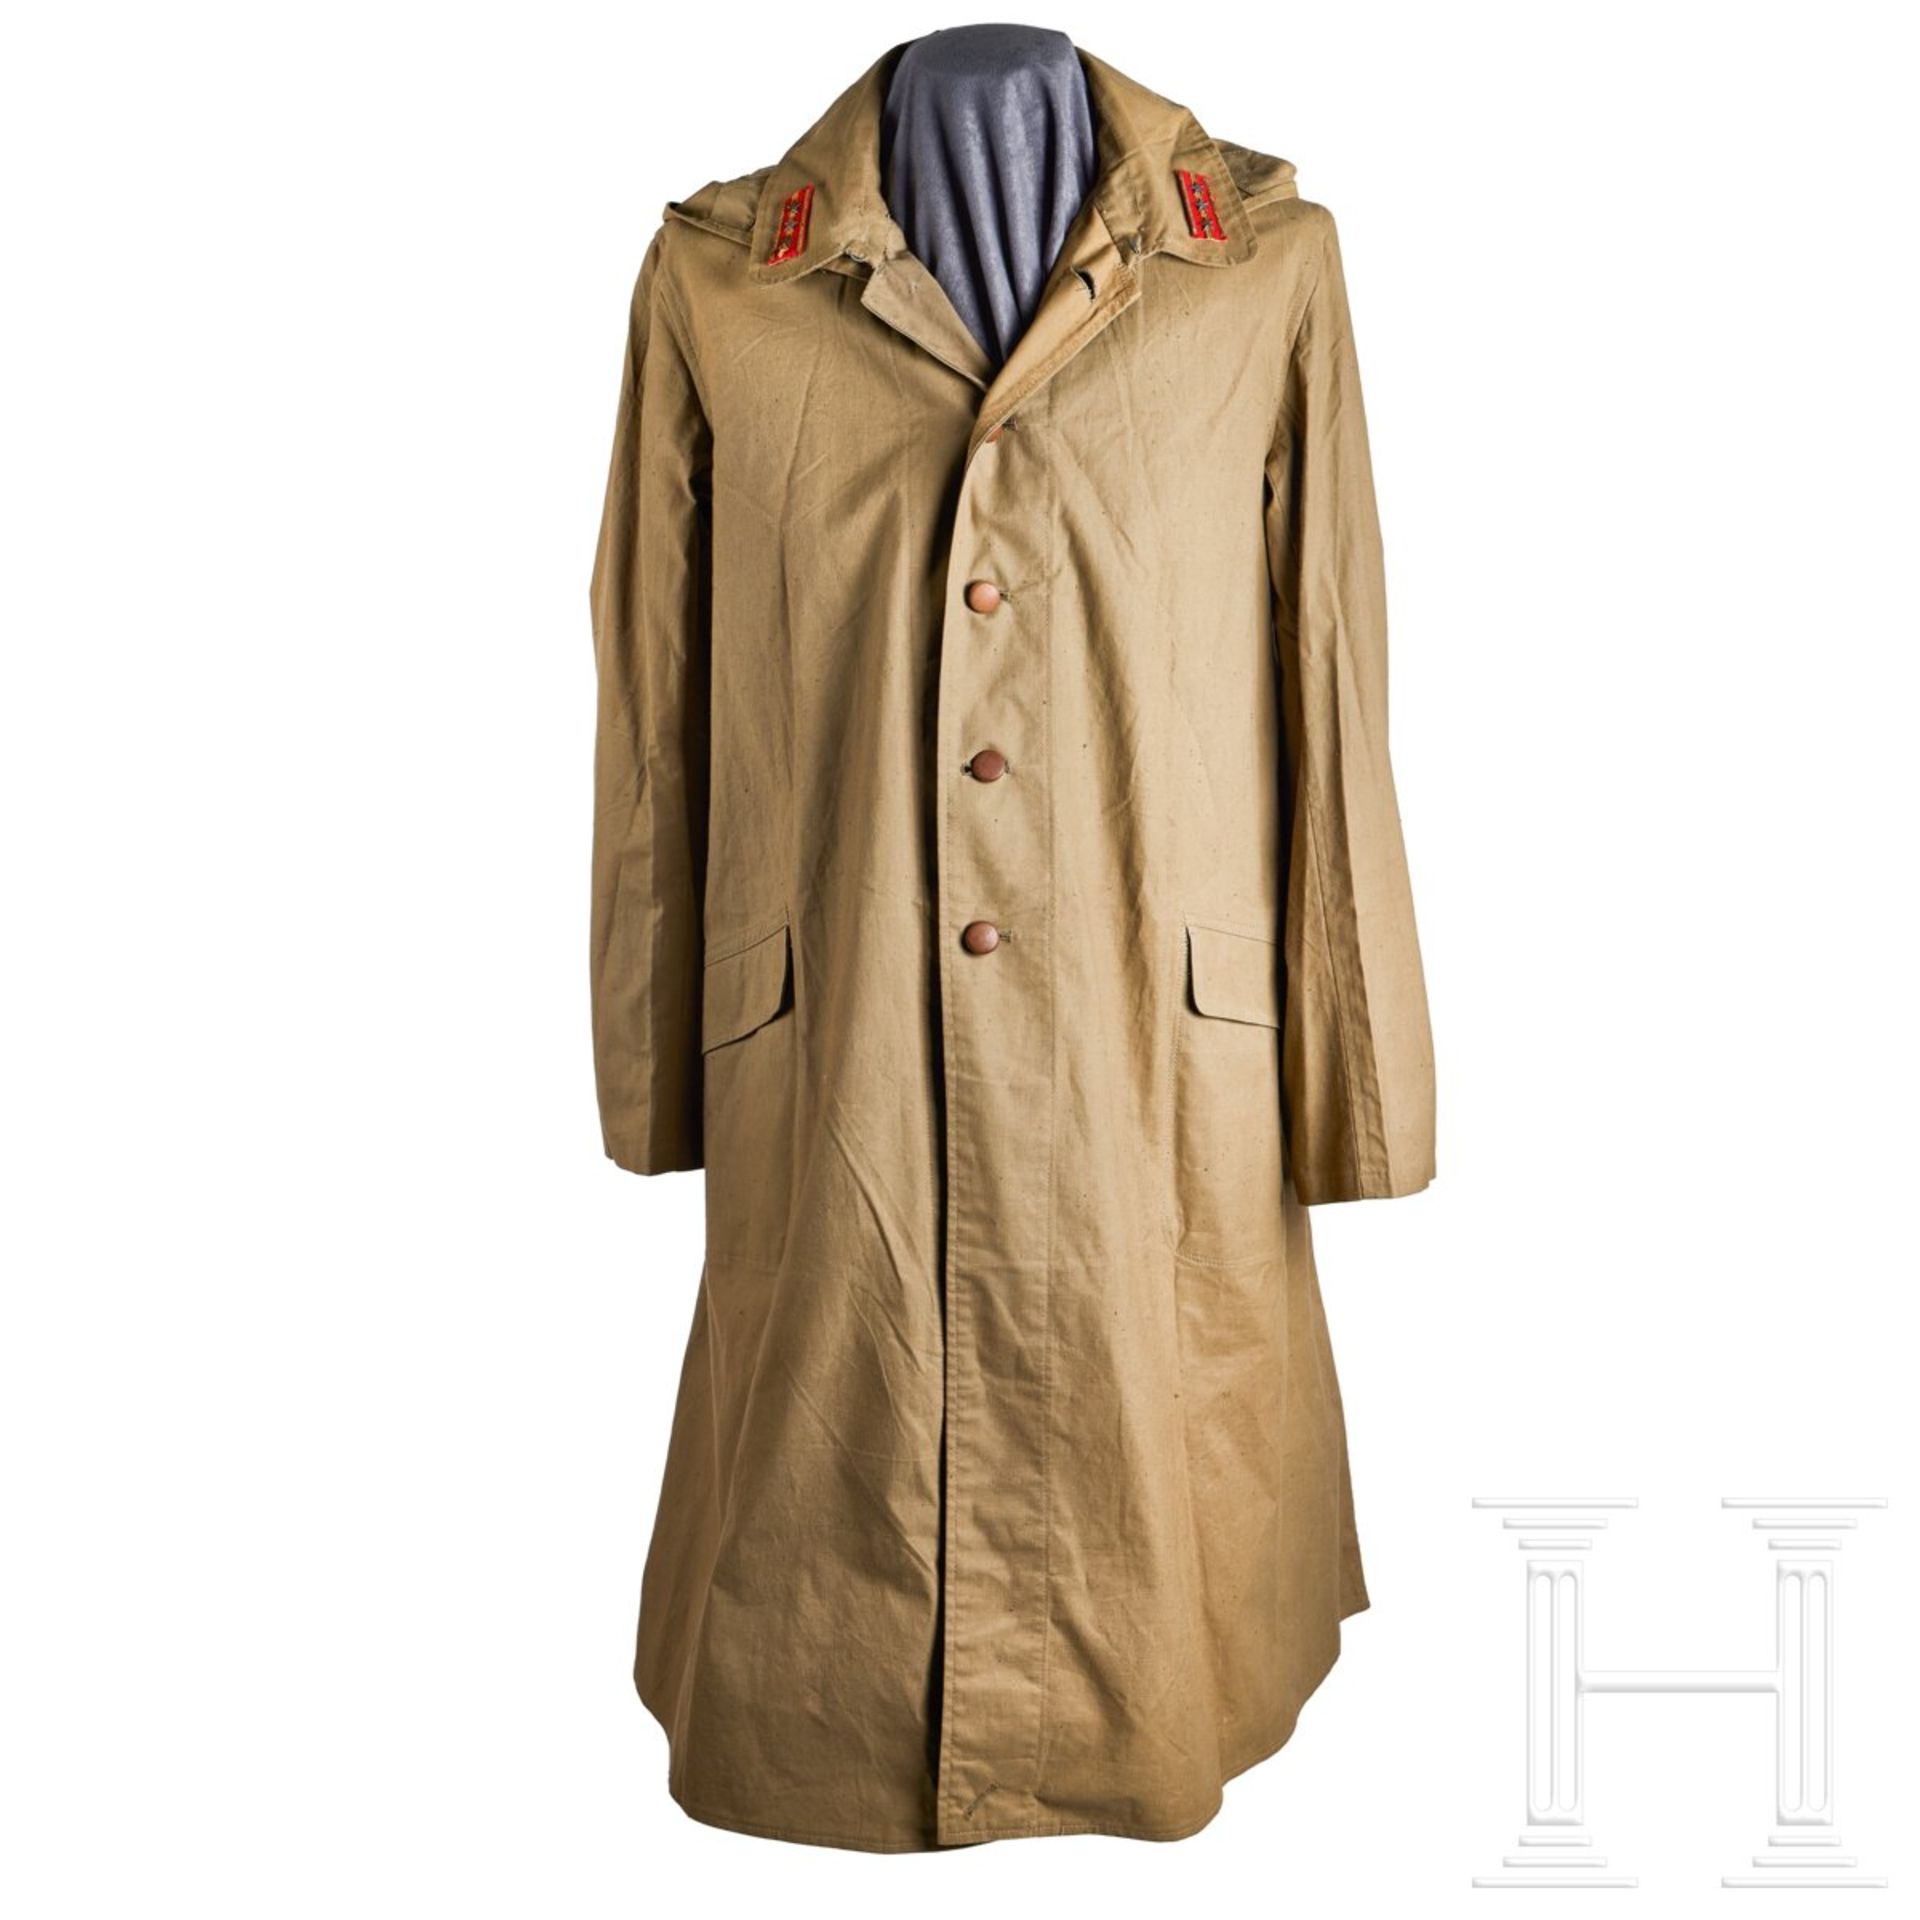 A Japanese Army Officer Raincoat